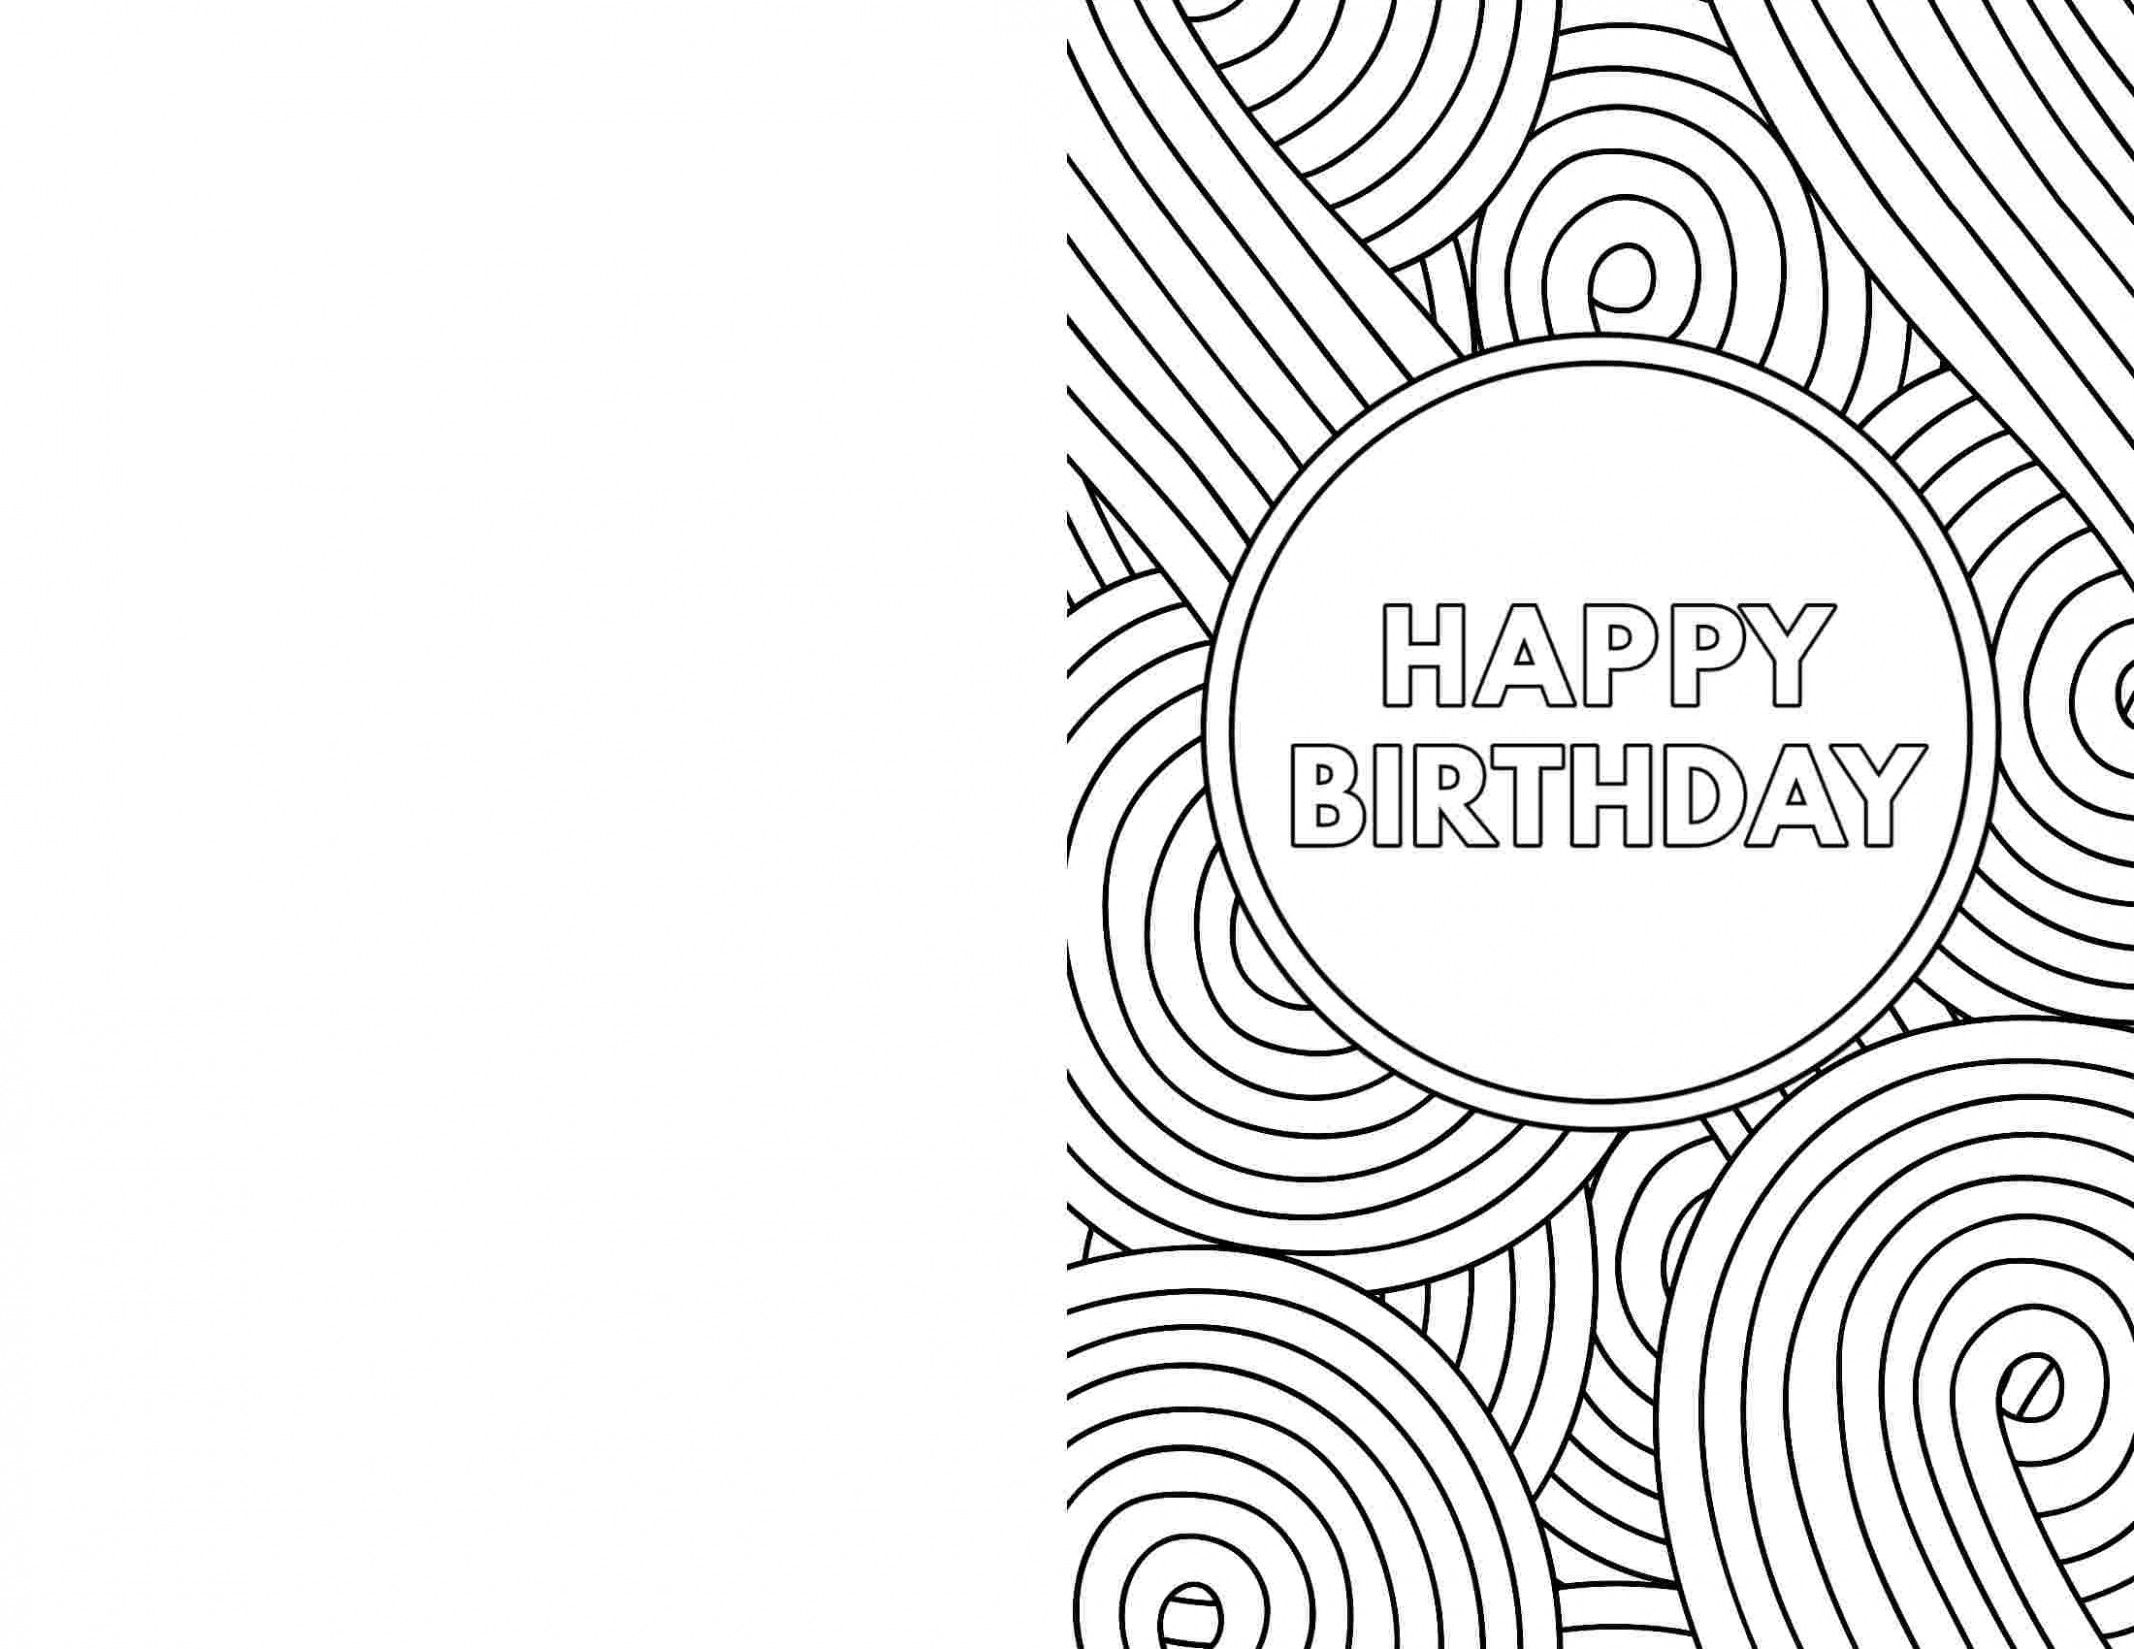 Printable Birthday Cards To Color_82166